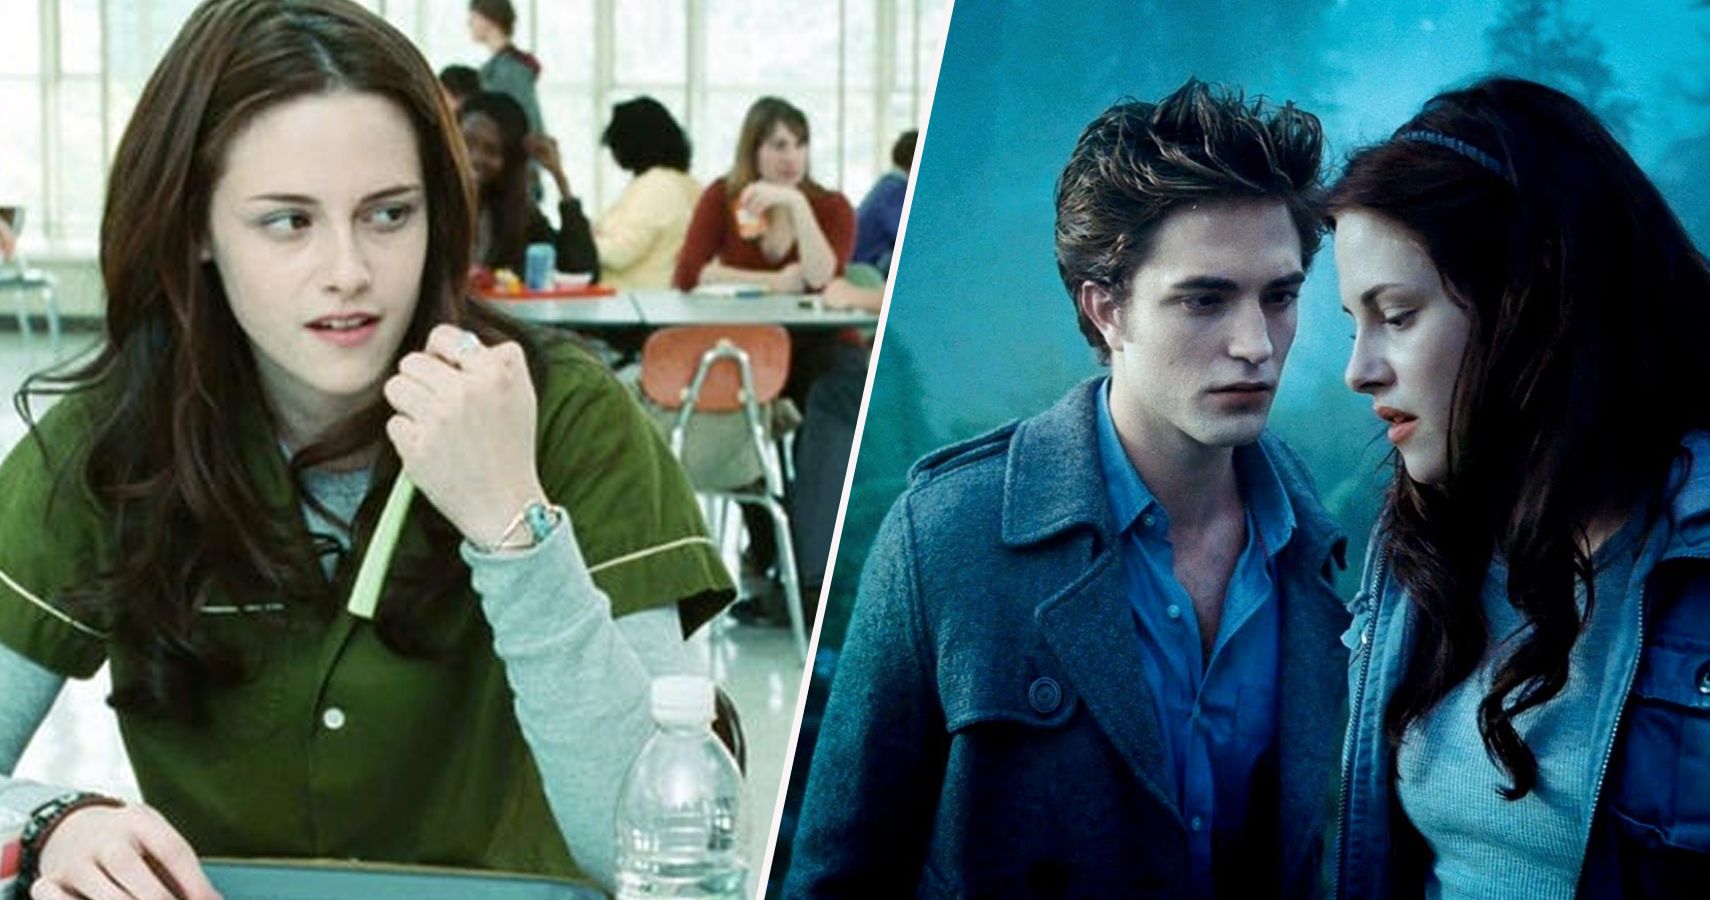 Twilight 10 Characters Bella Should Have Been With (Other Than Edward)